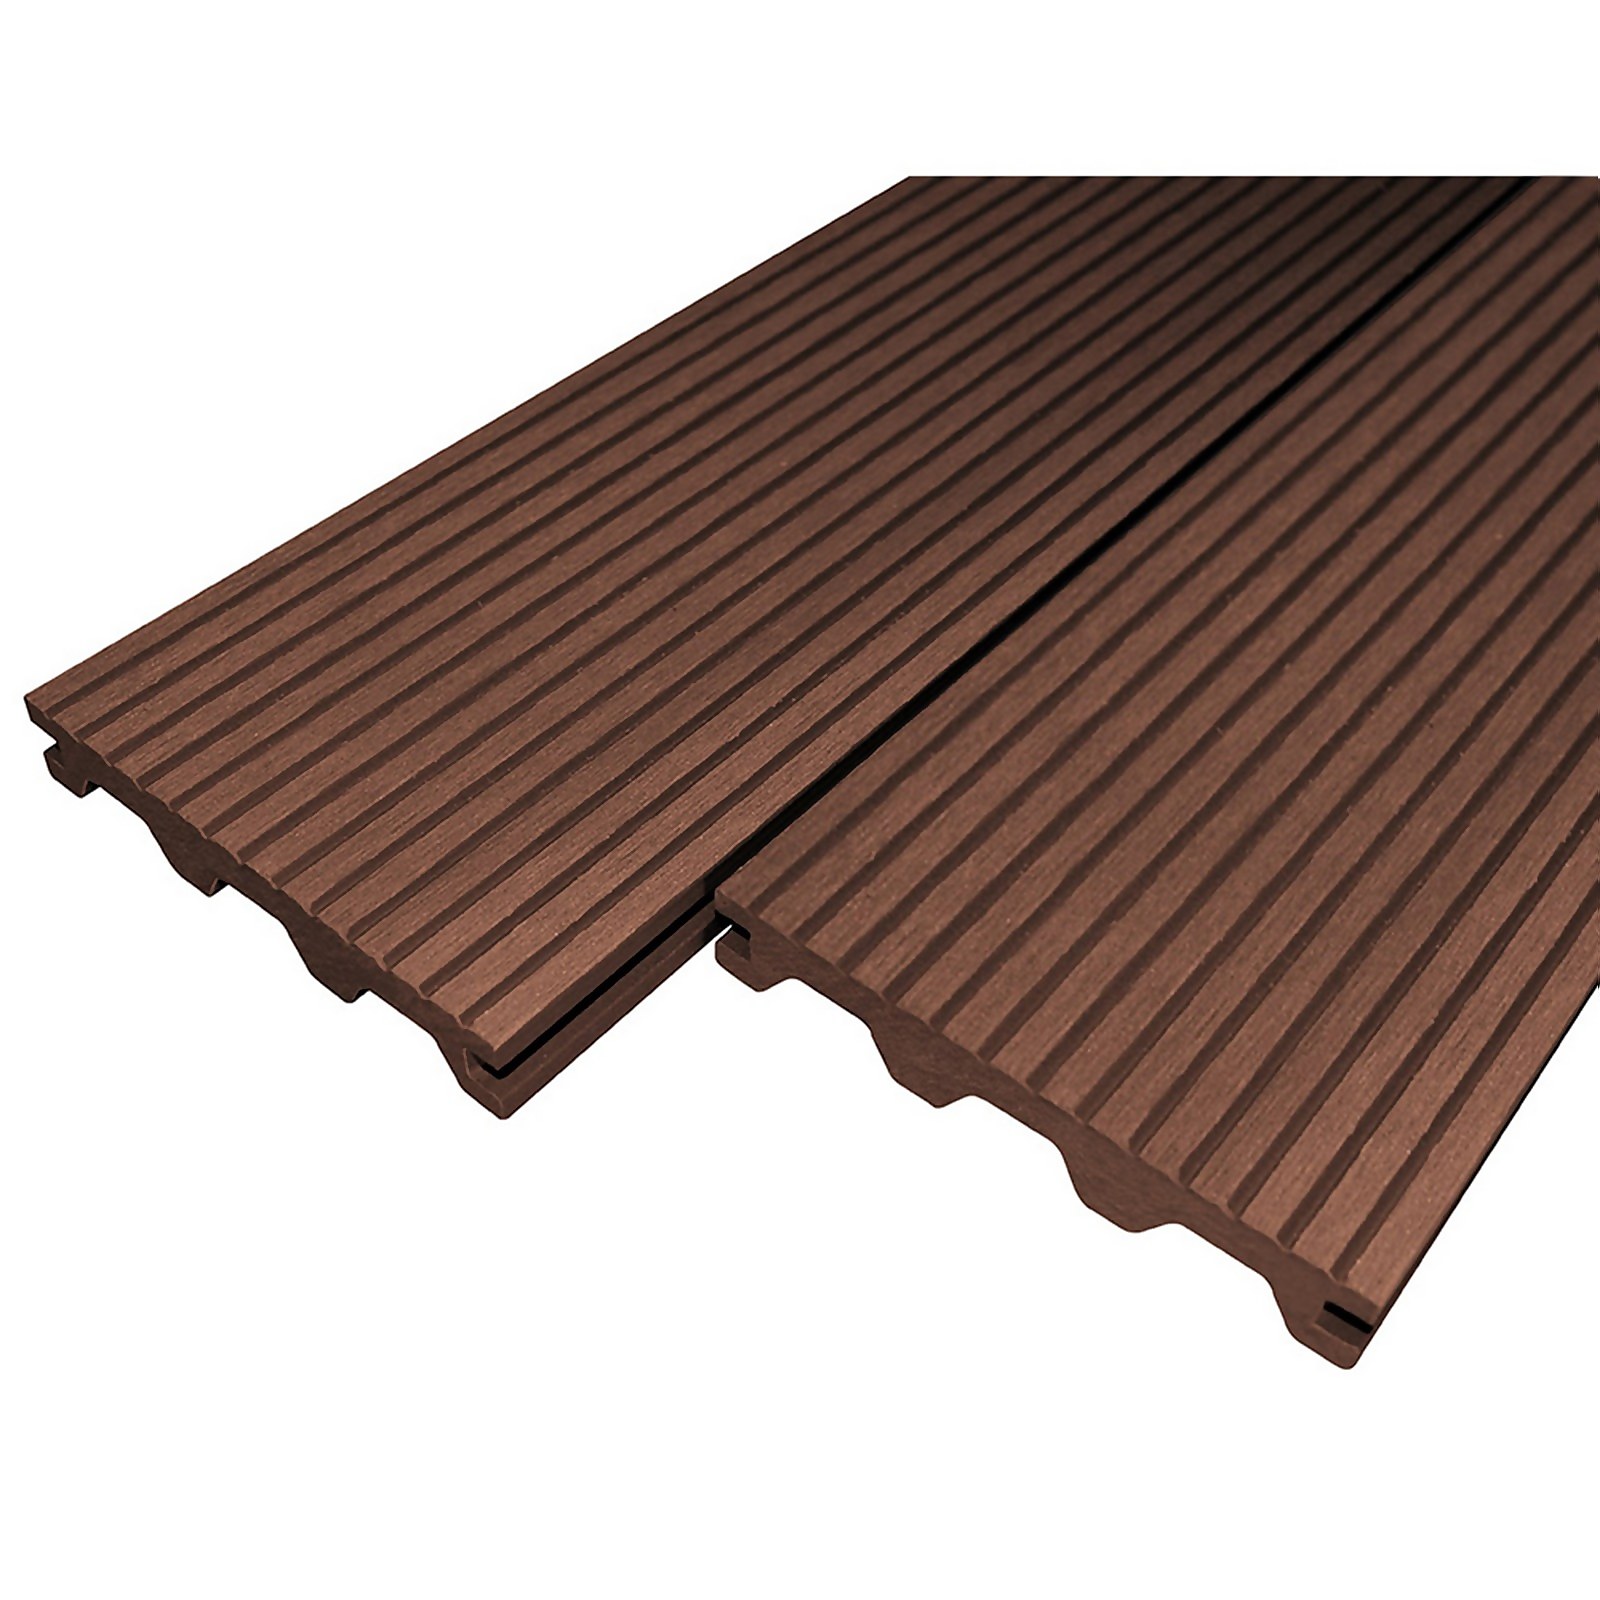 Photo of Victoria Composite Decking Castle Groove 40 Pack Redwood - 20.16 M2